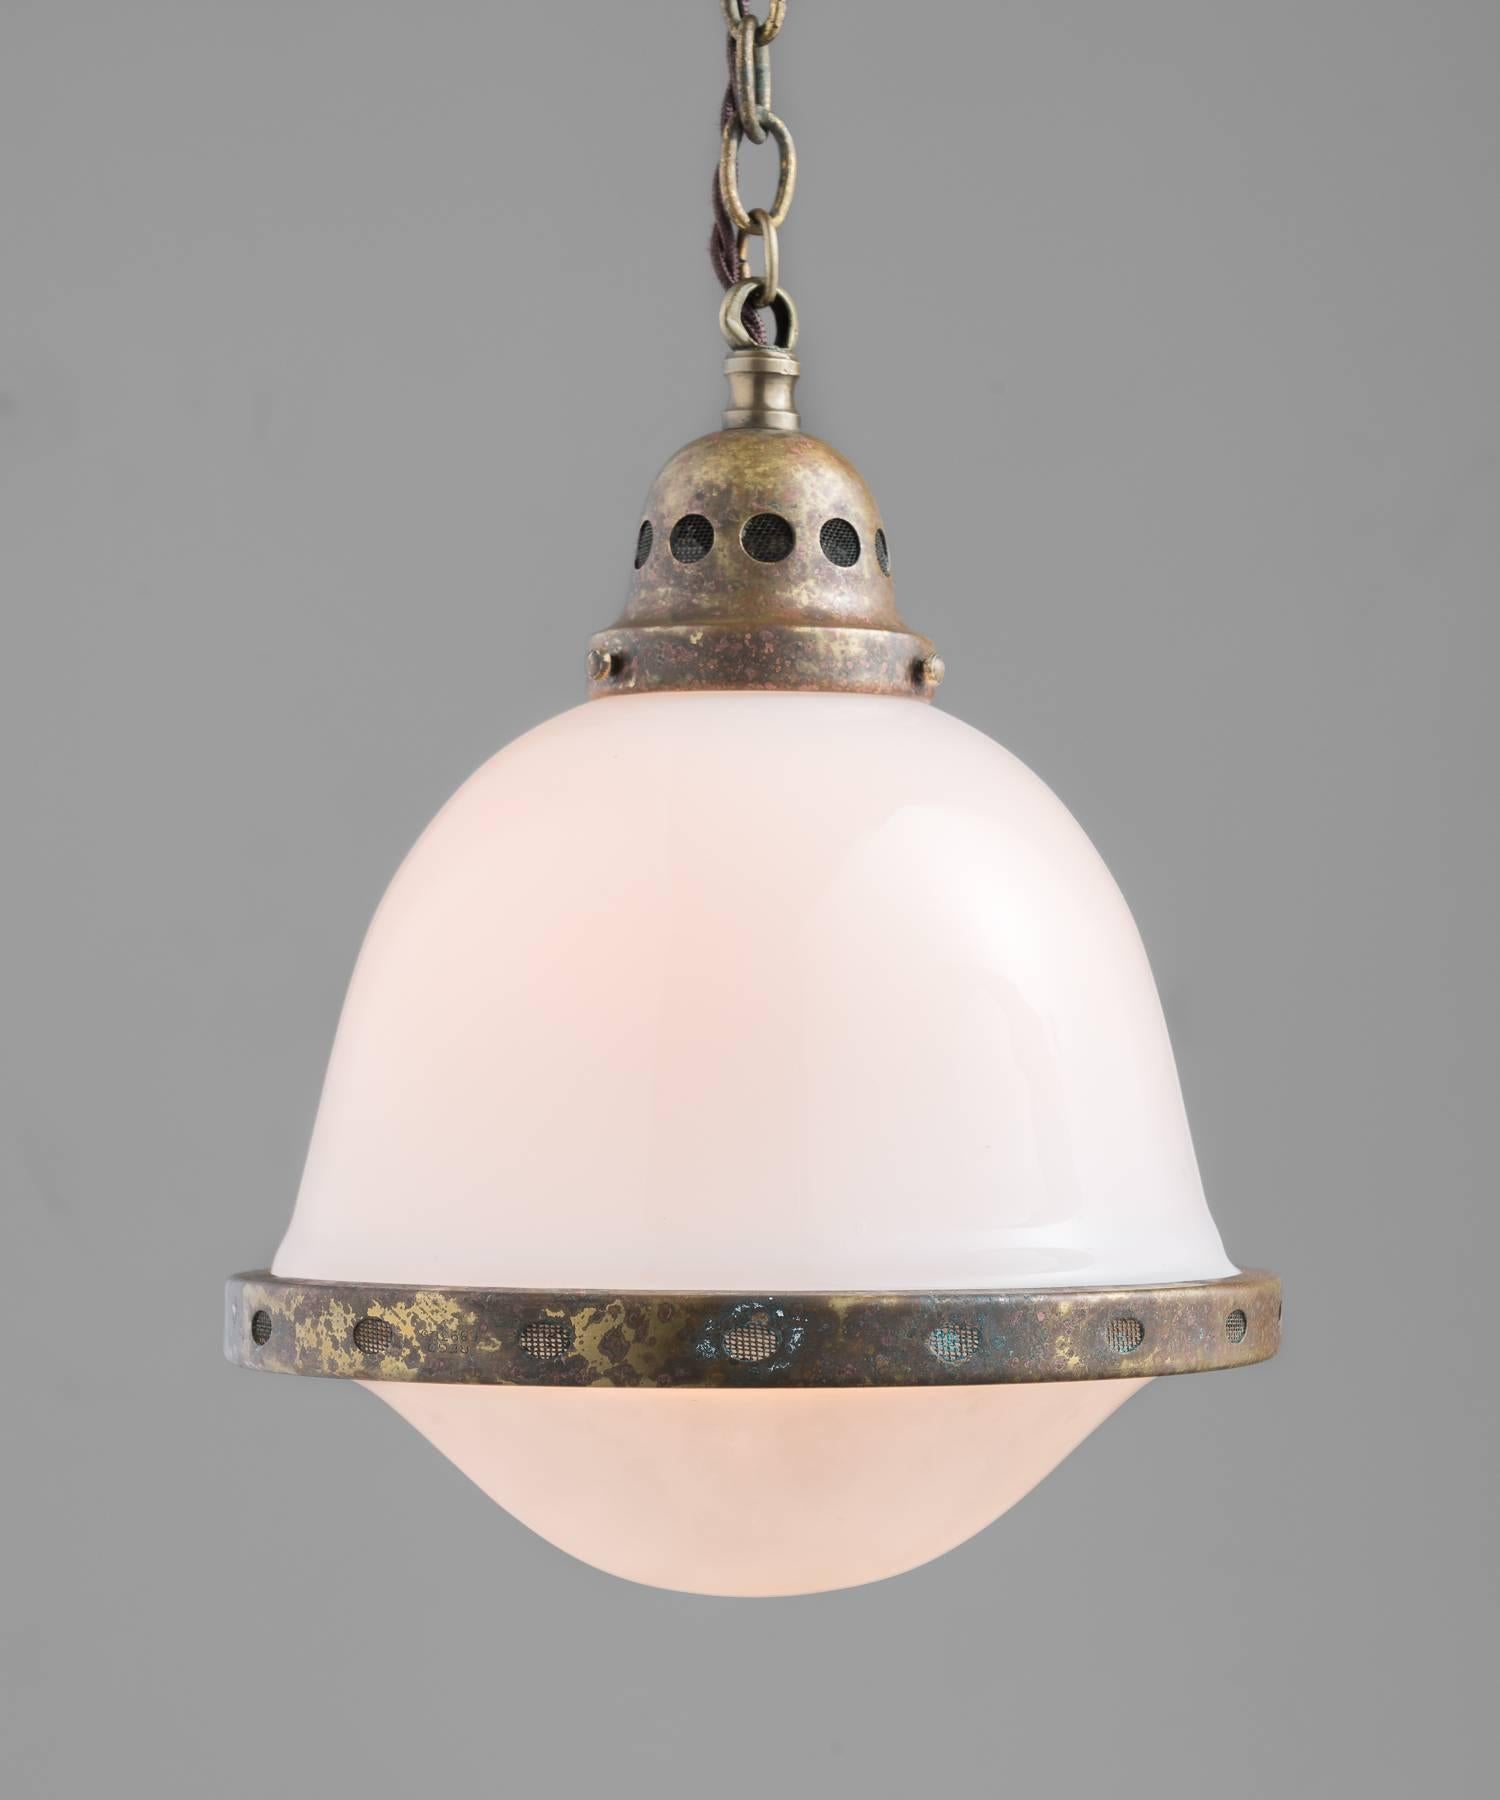 Rare Petite Peter Behrens Pendant, circa 1920

Unique, petite form with Opaline Glass shades secured by a patinated brass brace. Manufactured by AEG Siemens.

Overall height adjustable.

